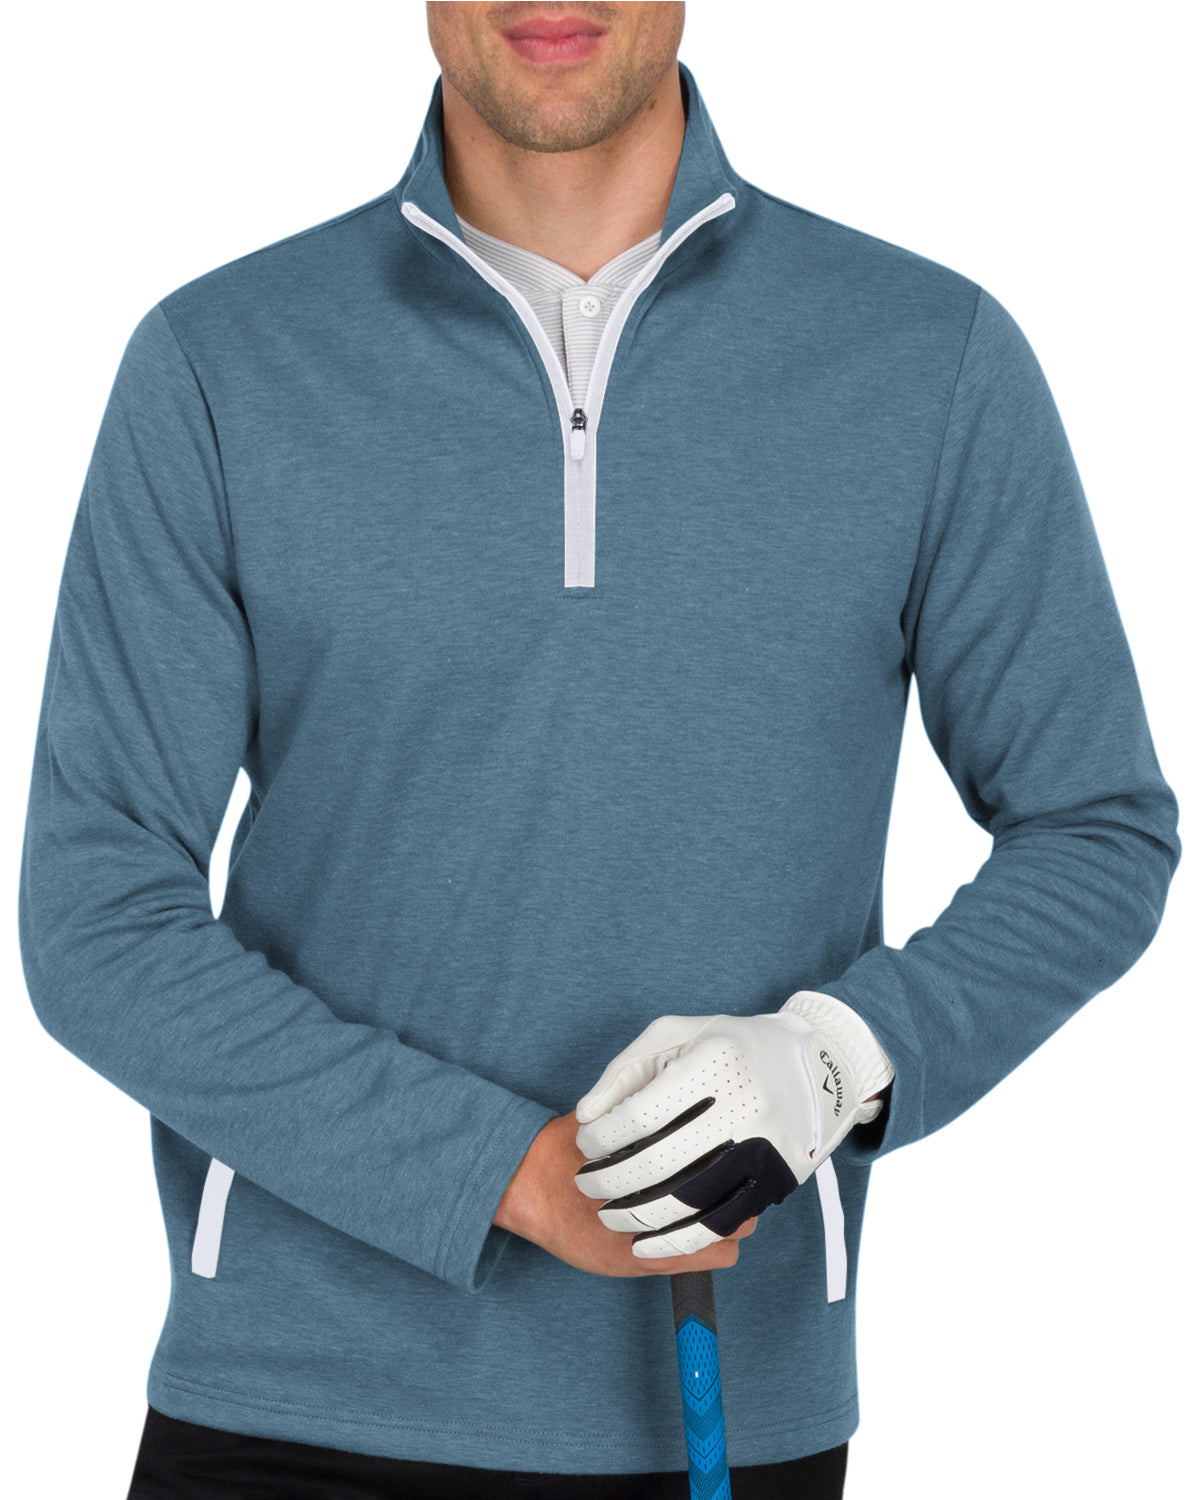 Extreme Deals - Half Zip Golf Pullover with Pockets